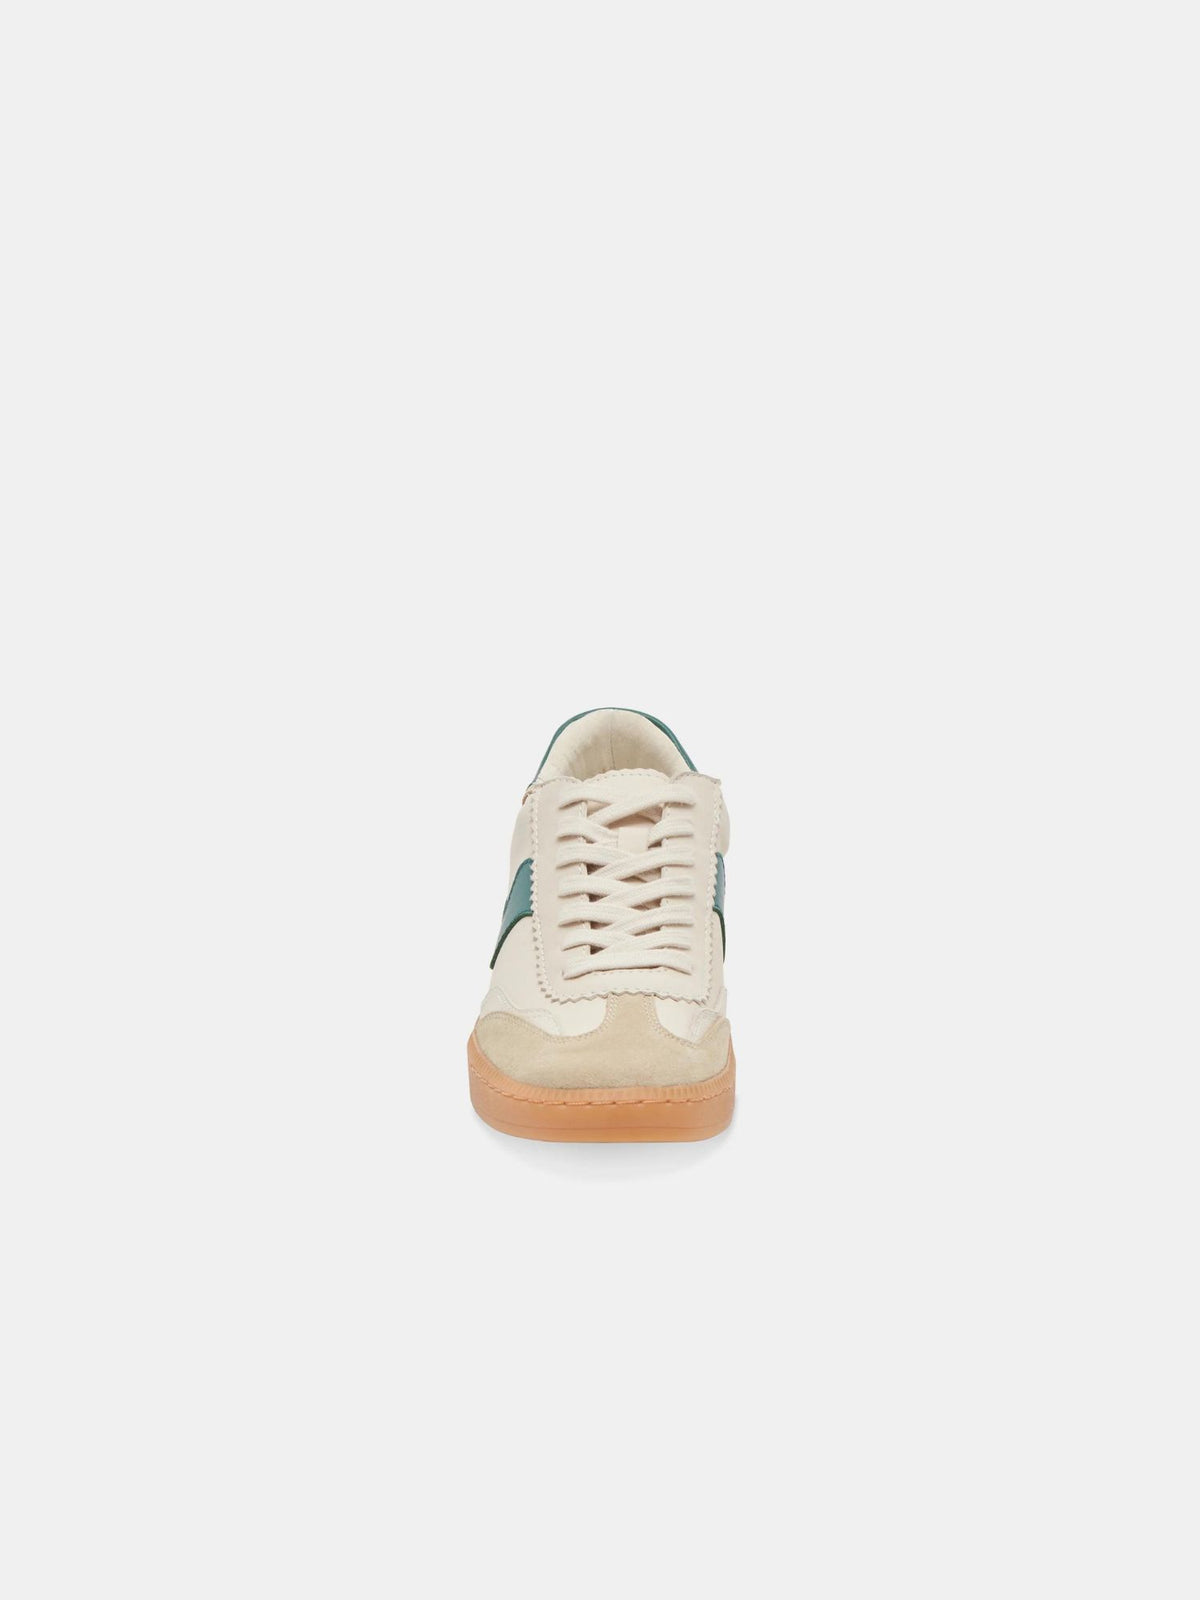 dole vita leather notice sneakers in white and green-front